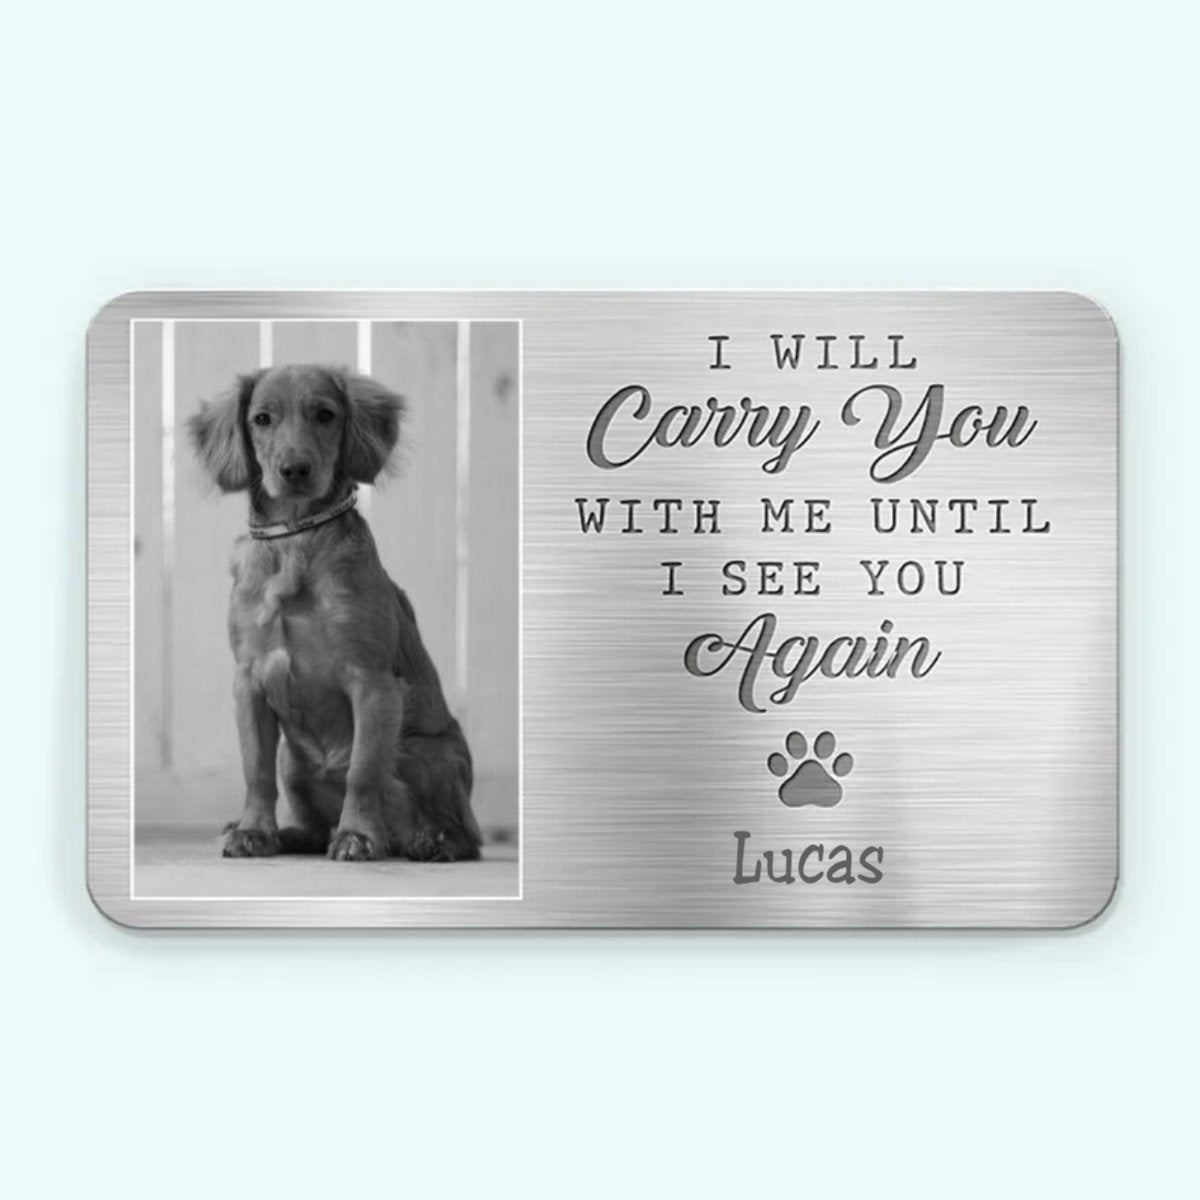 Pet Lovers - My Pawprints May No Longer Be In Your House - Personalized Aluminum Wallet Card - The Next Custom Gift